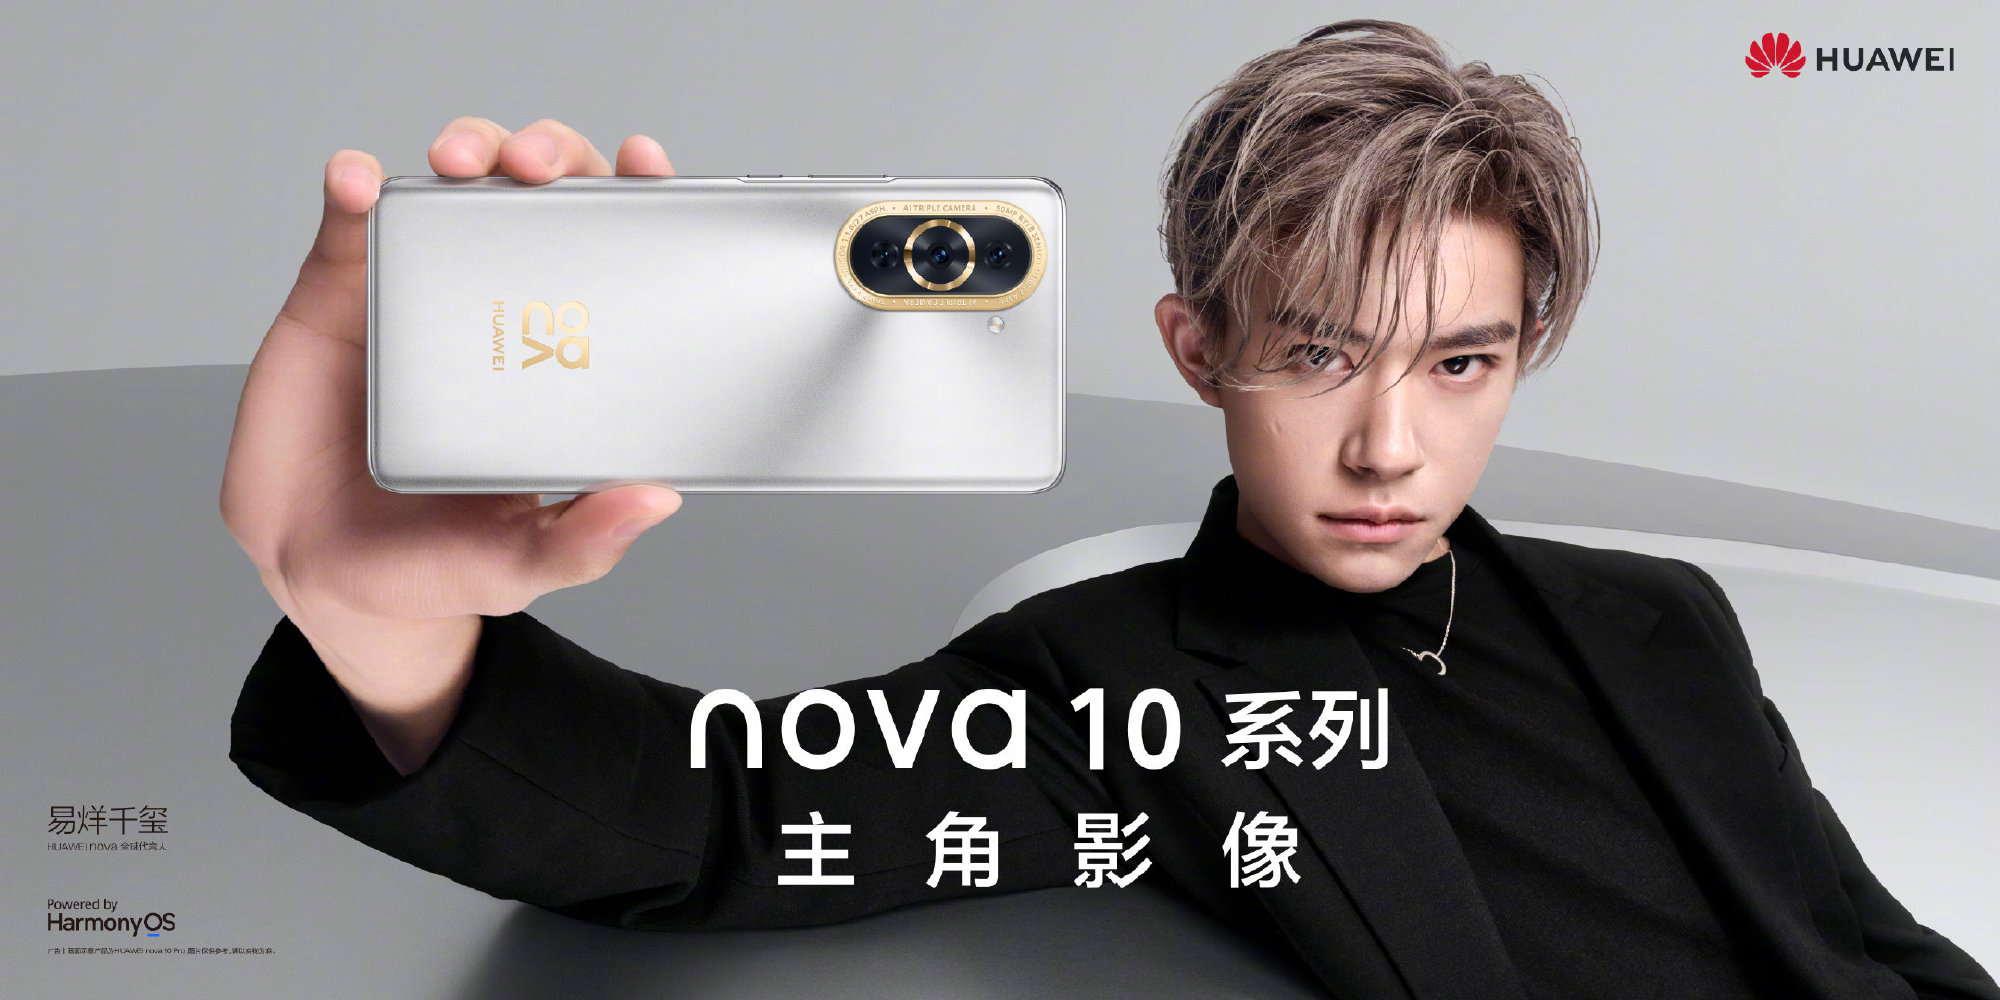 When is Huawei nova10pro launched? Release date? Comparison of configuration parameters differences